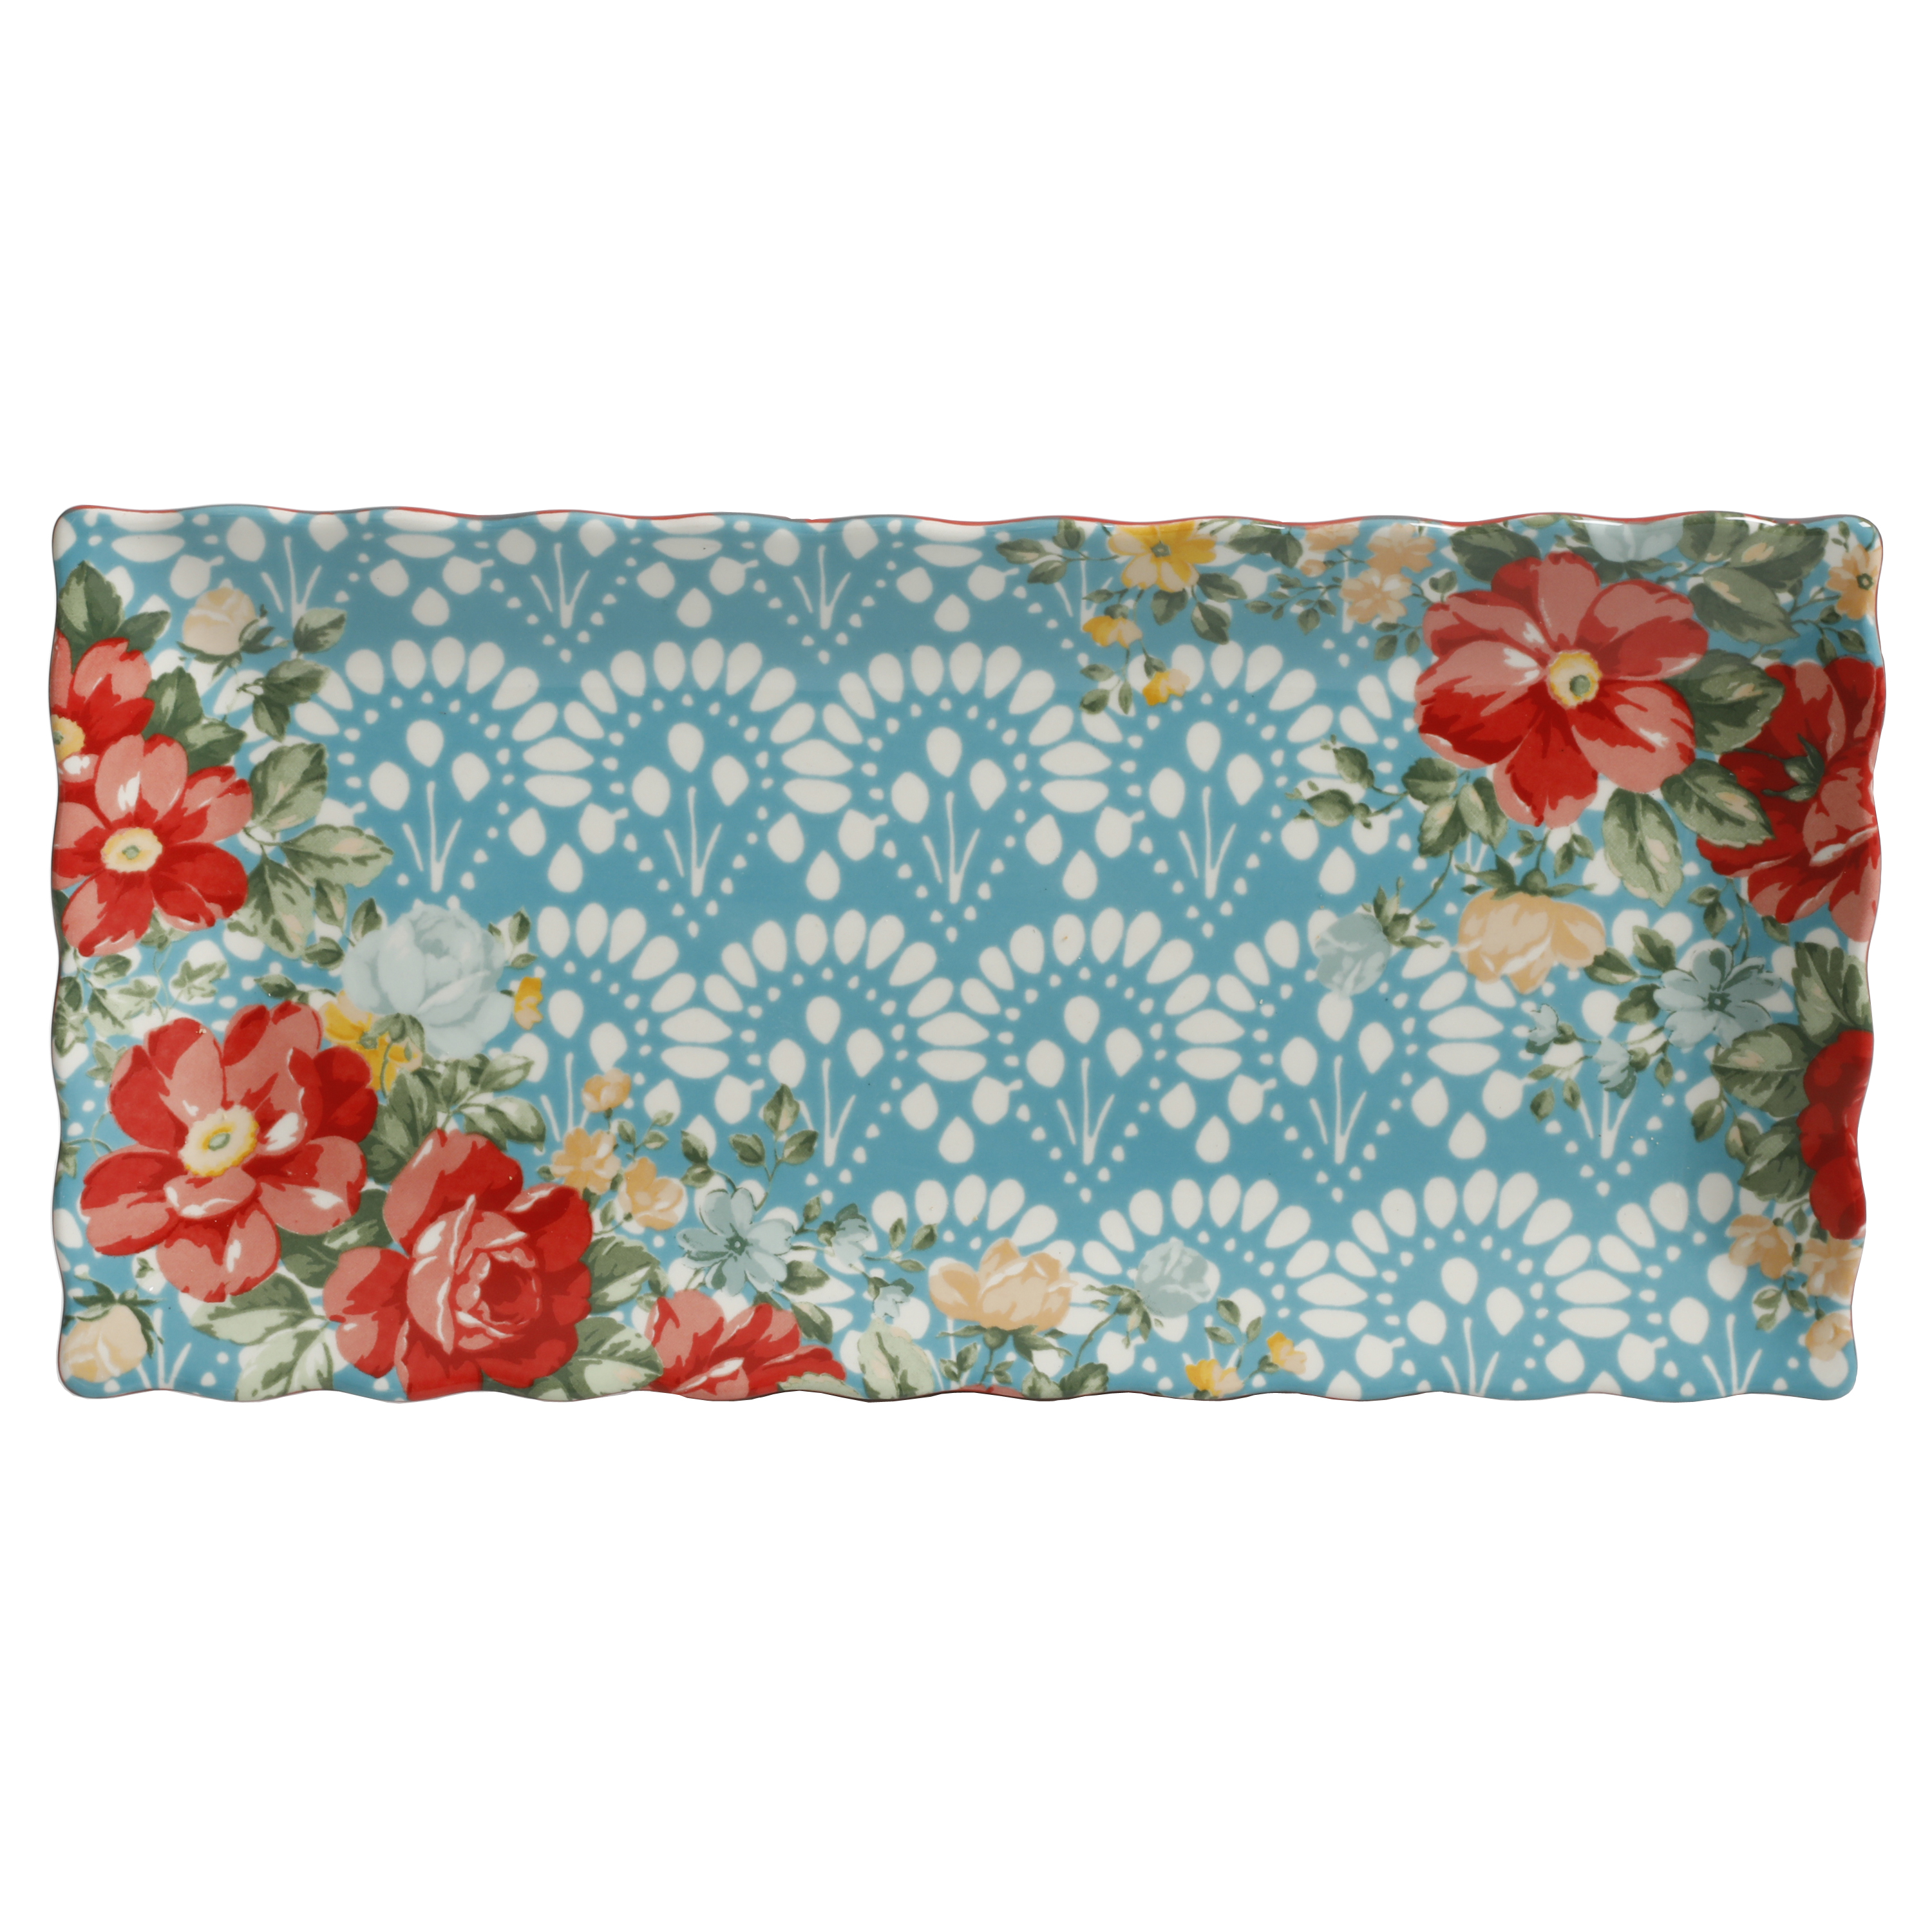 The Pioneer Woman Floral Medley 3-Piece Serving Platters - image 5 of 8